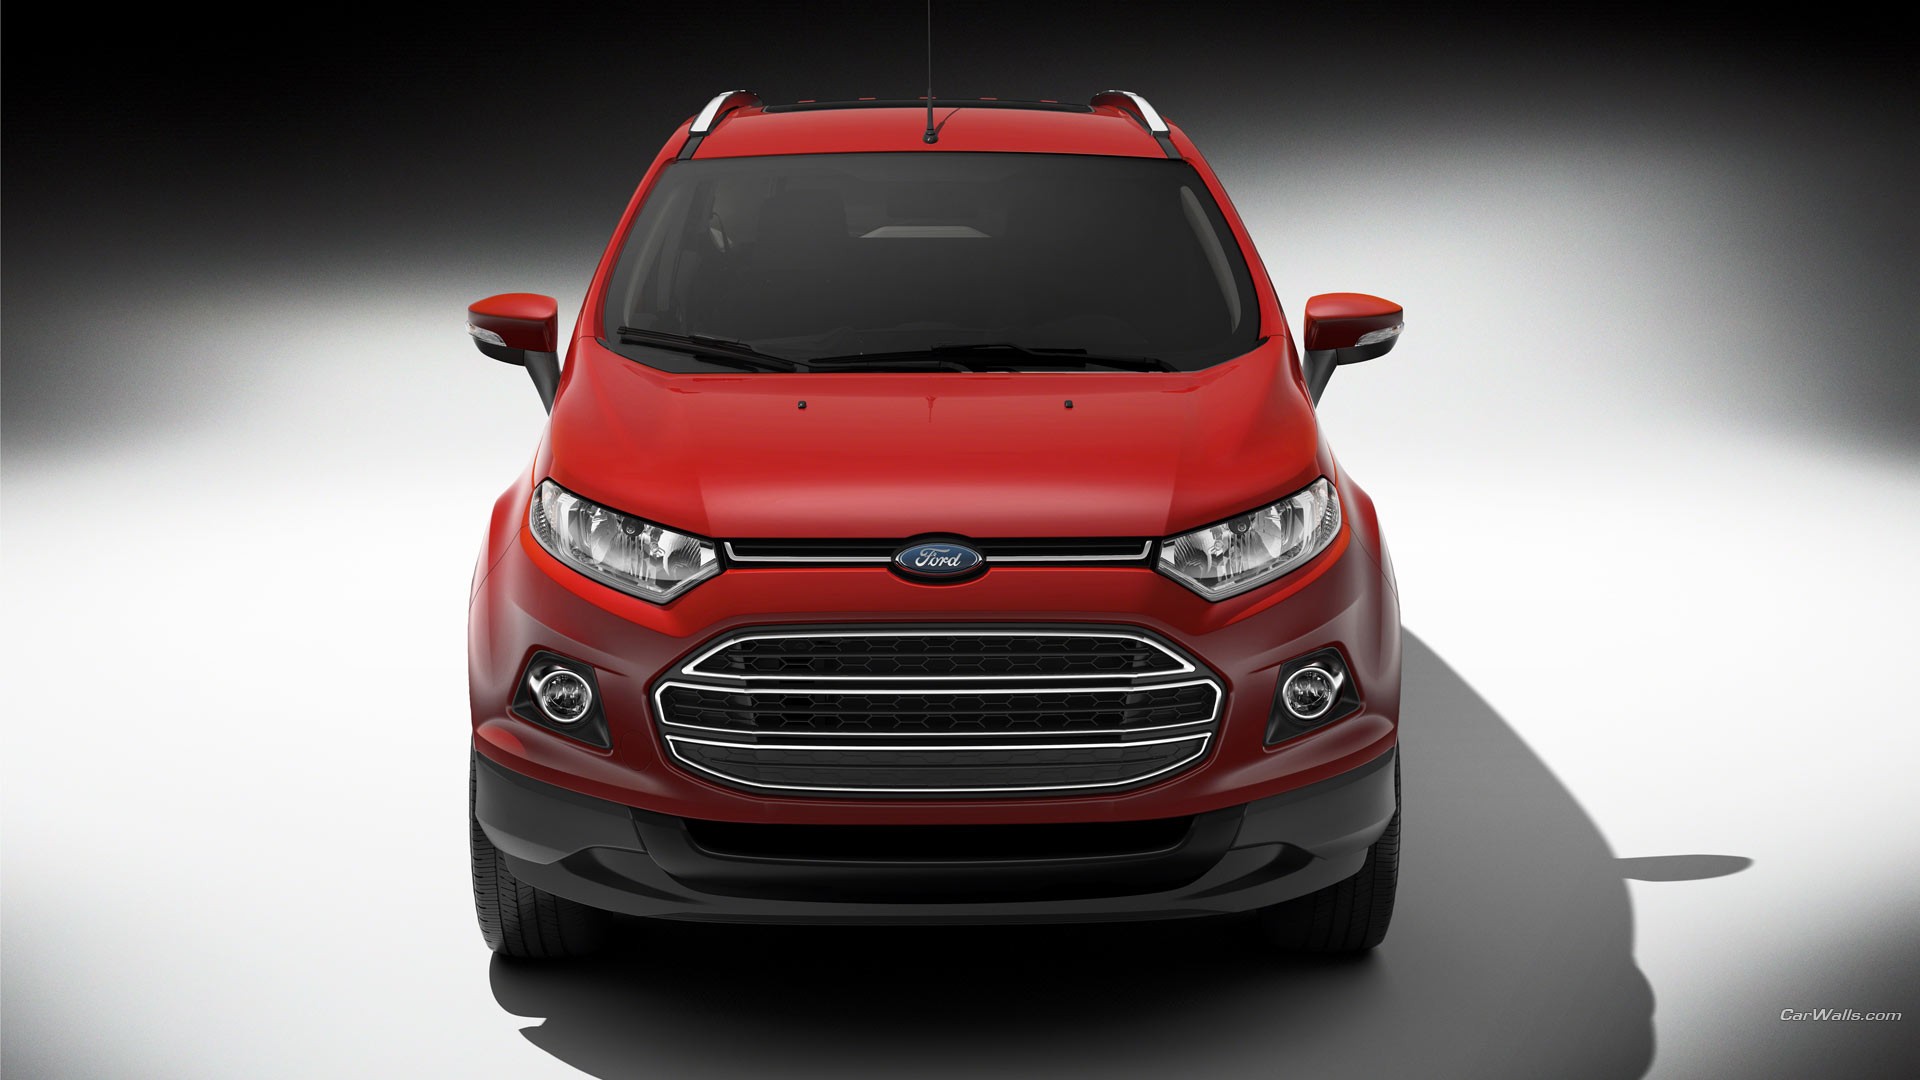 General 1920x1080 Ford EcoSport Ford car vehicle red cars SUV Brazilian cars